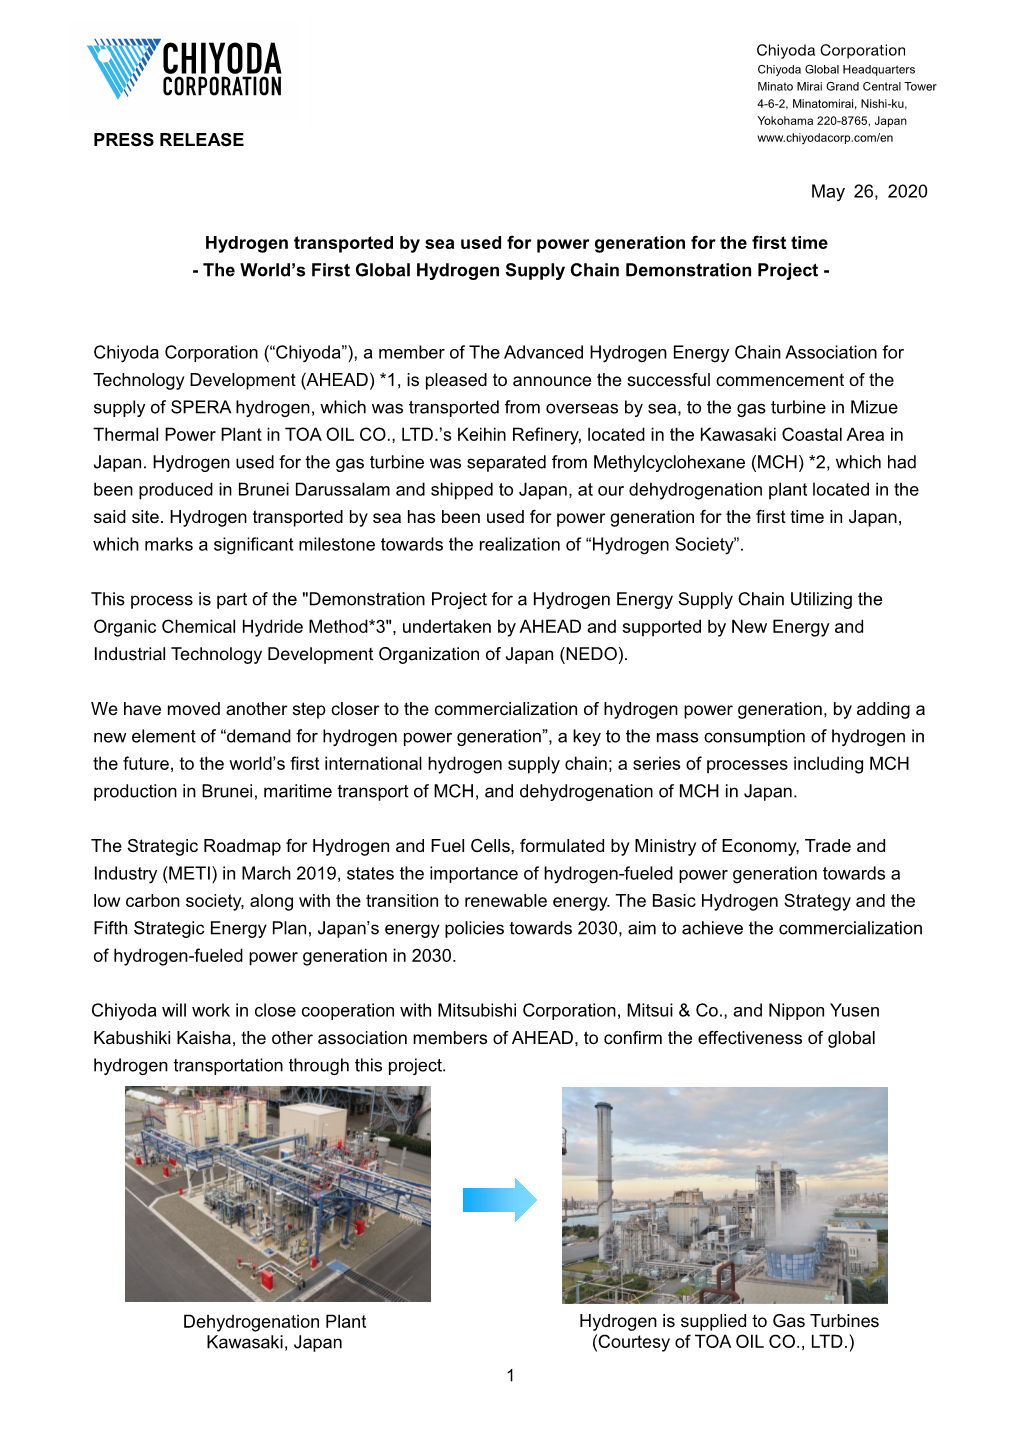 PRESS RELEASE May 26, 2020 Hydrogen Transported by Sea Used